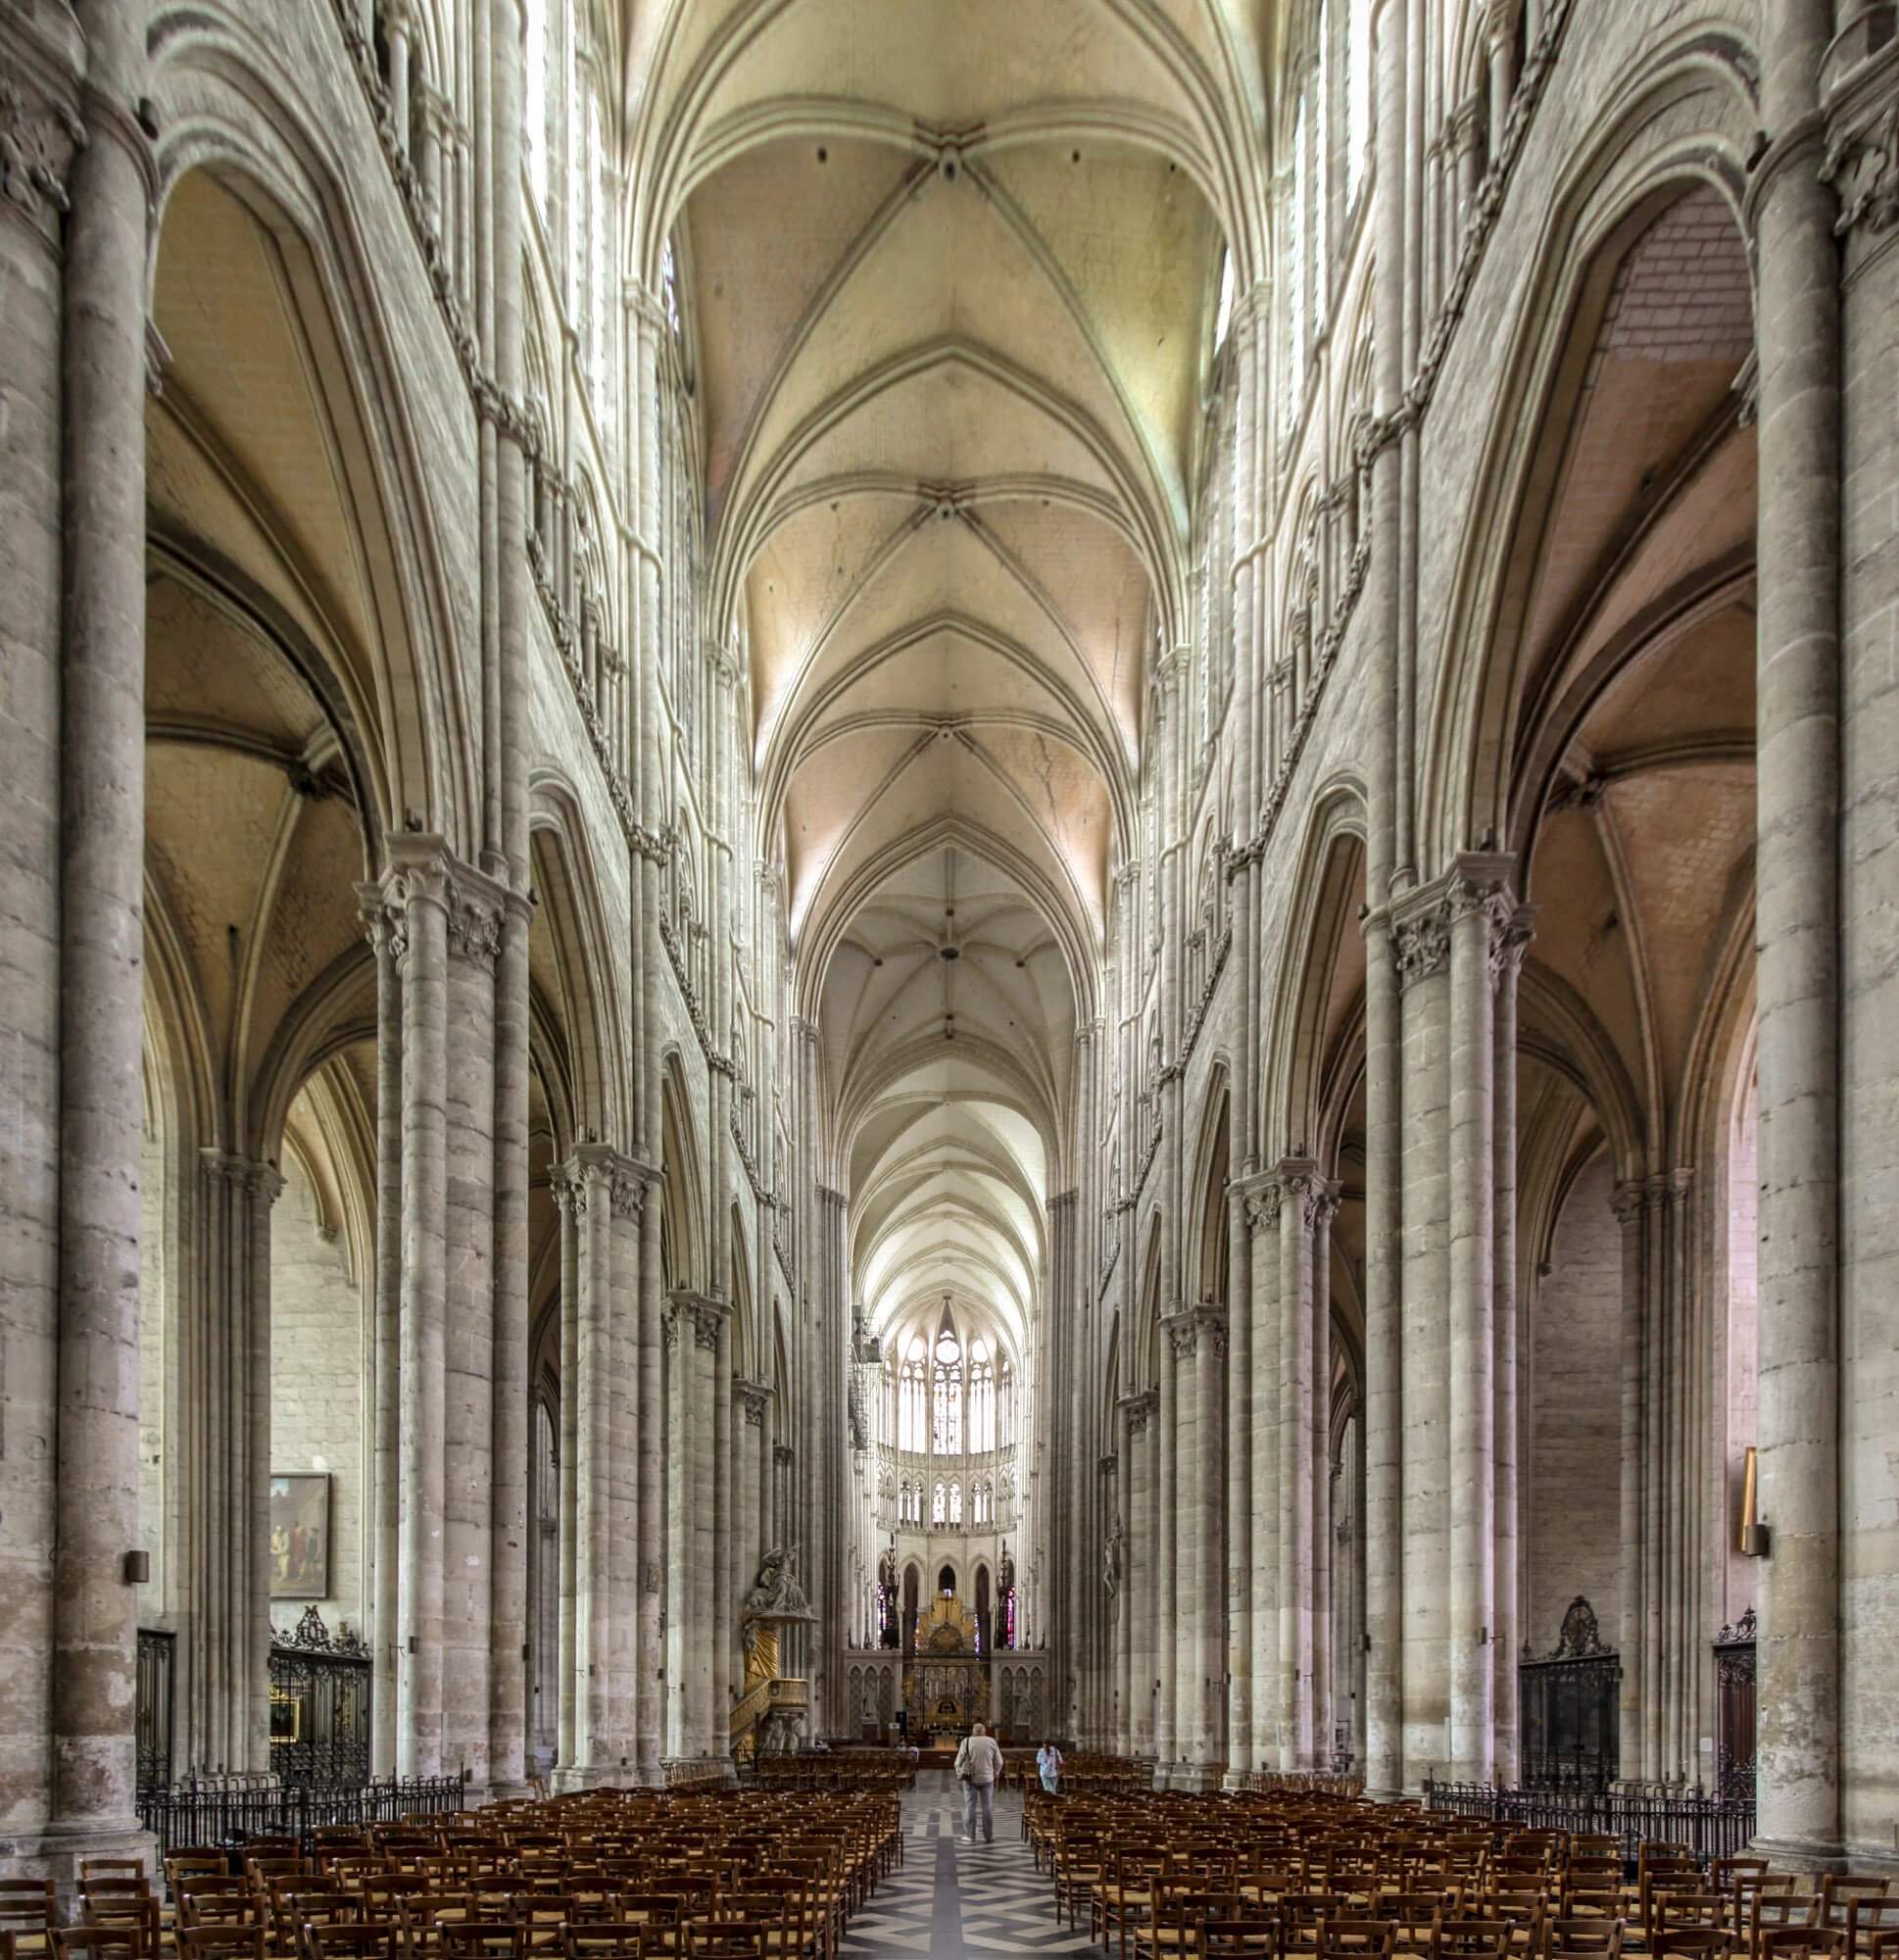 The interior of Amiens Cathedral